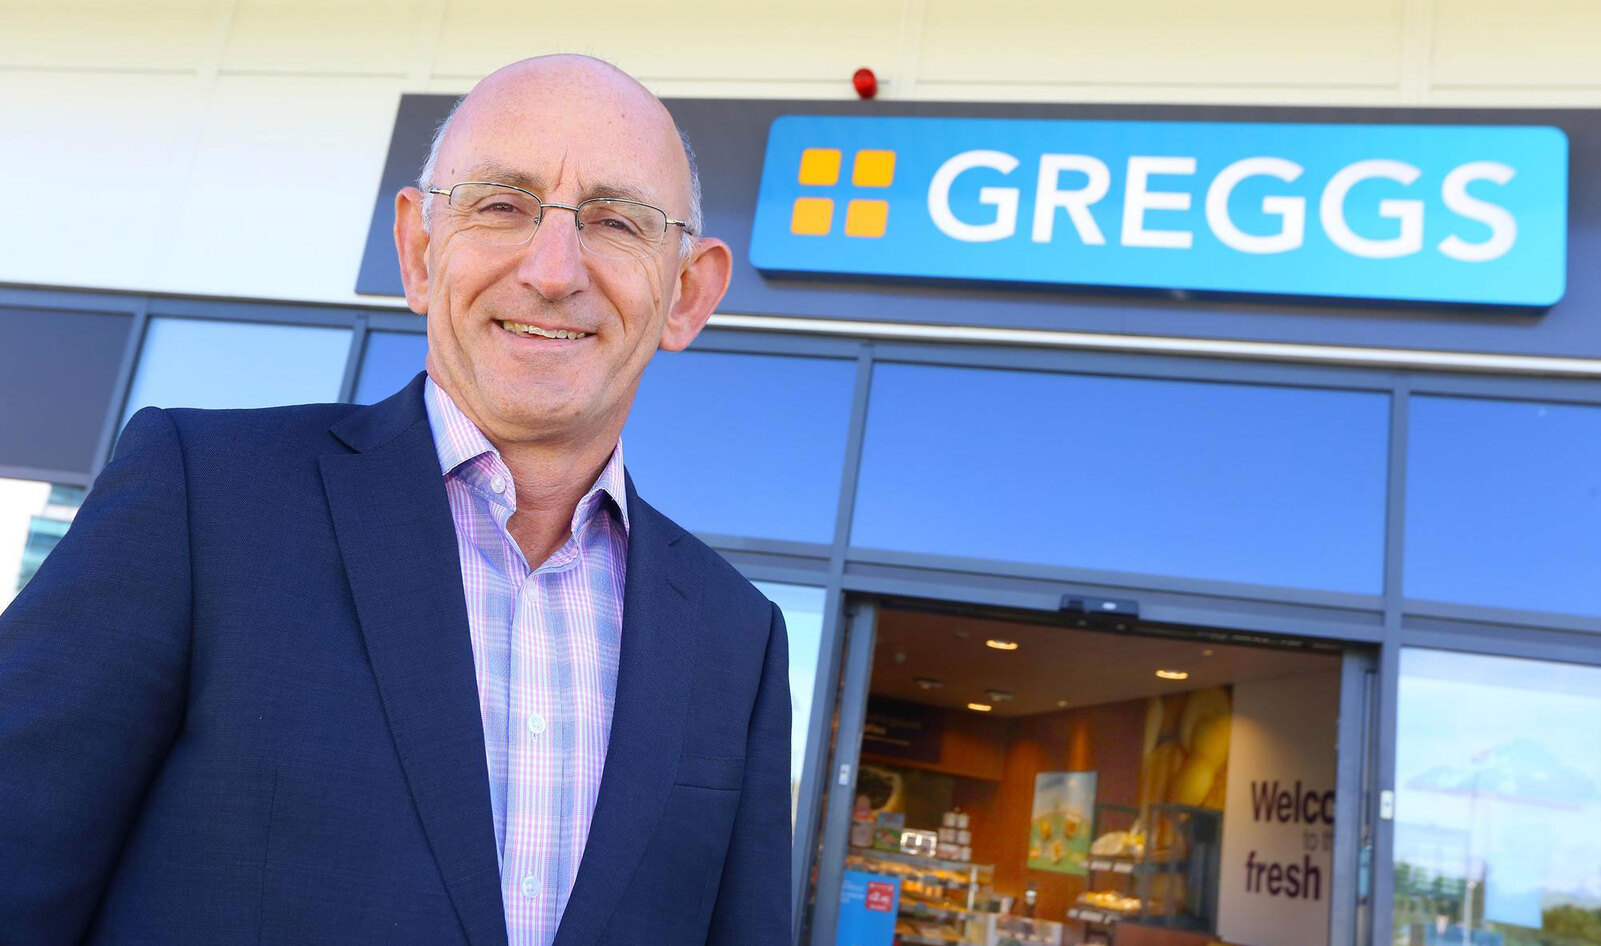 Documentary The Game Changers Inspires Greggs’ CEO to Go Vegan